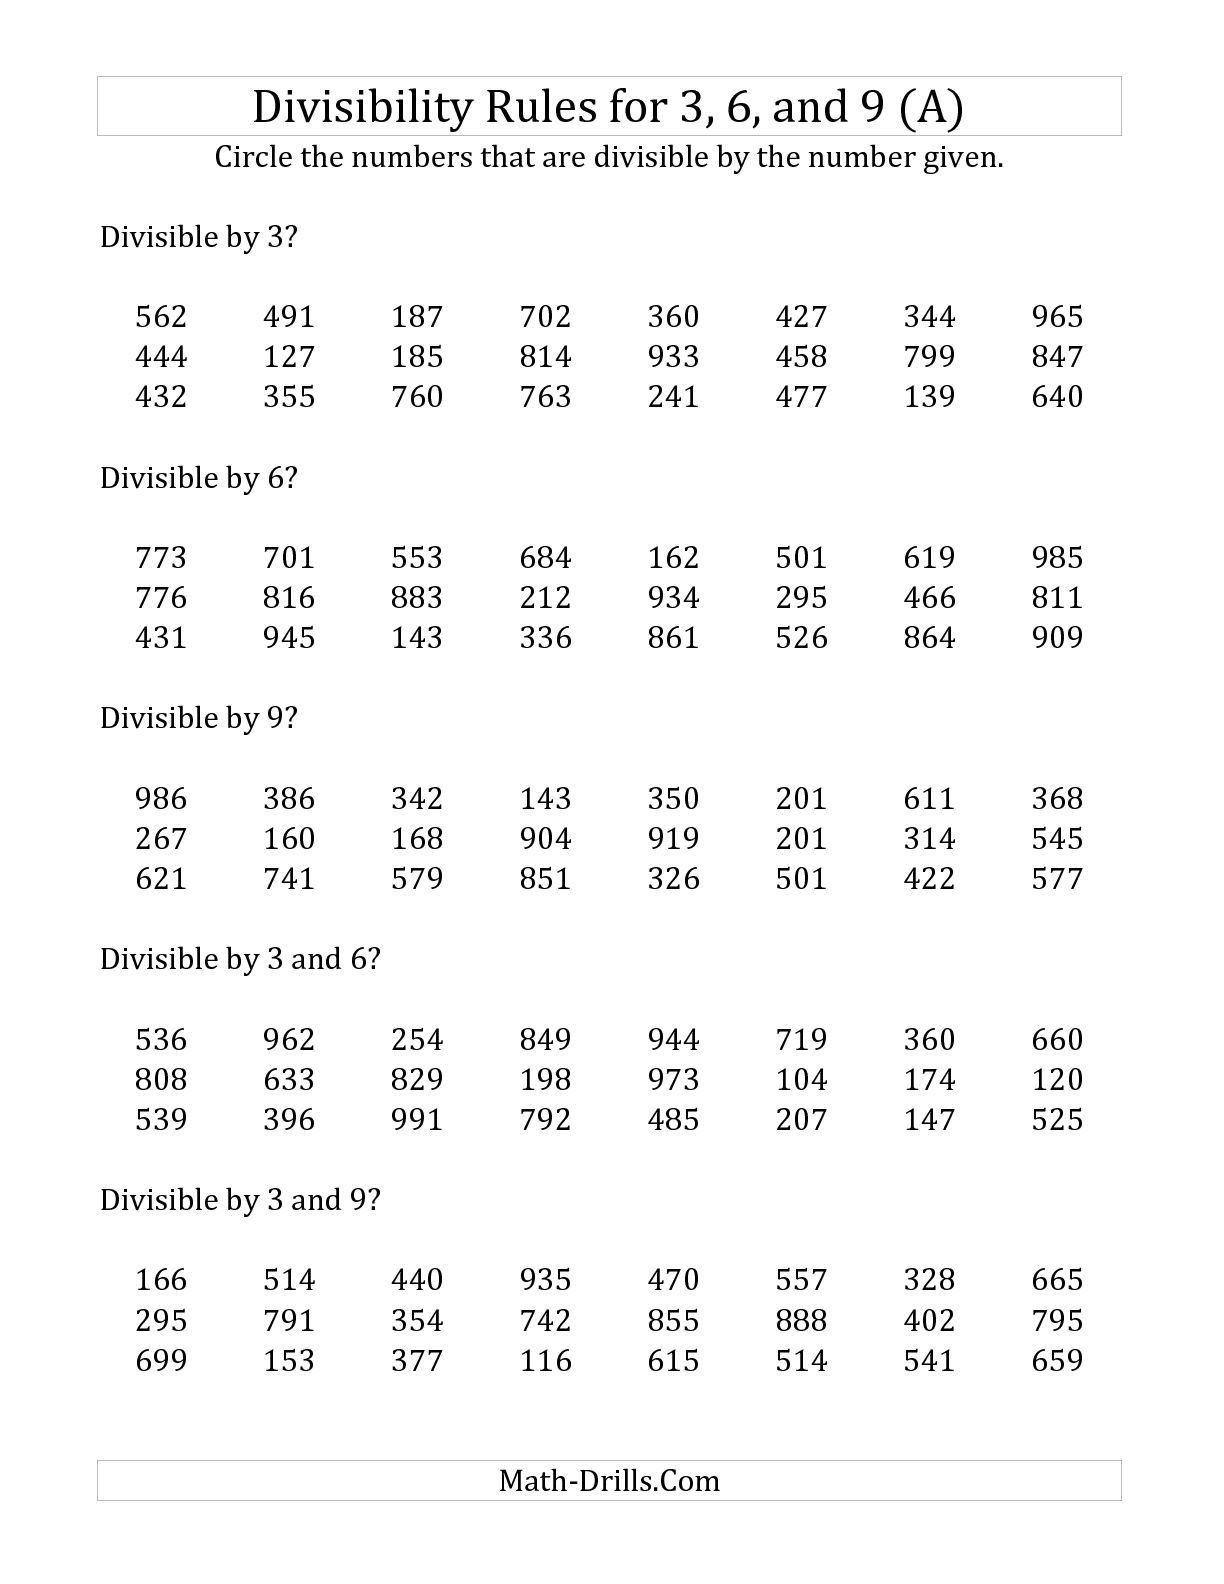 divisibility rules for 3 6 and 9 digit numbers a tests worksheet 